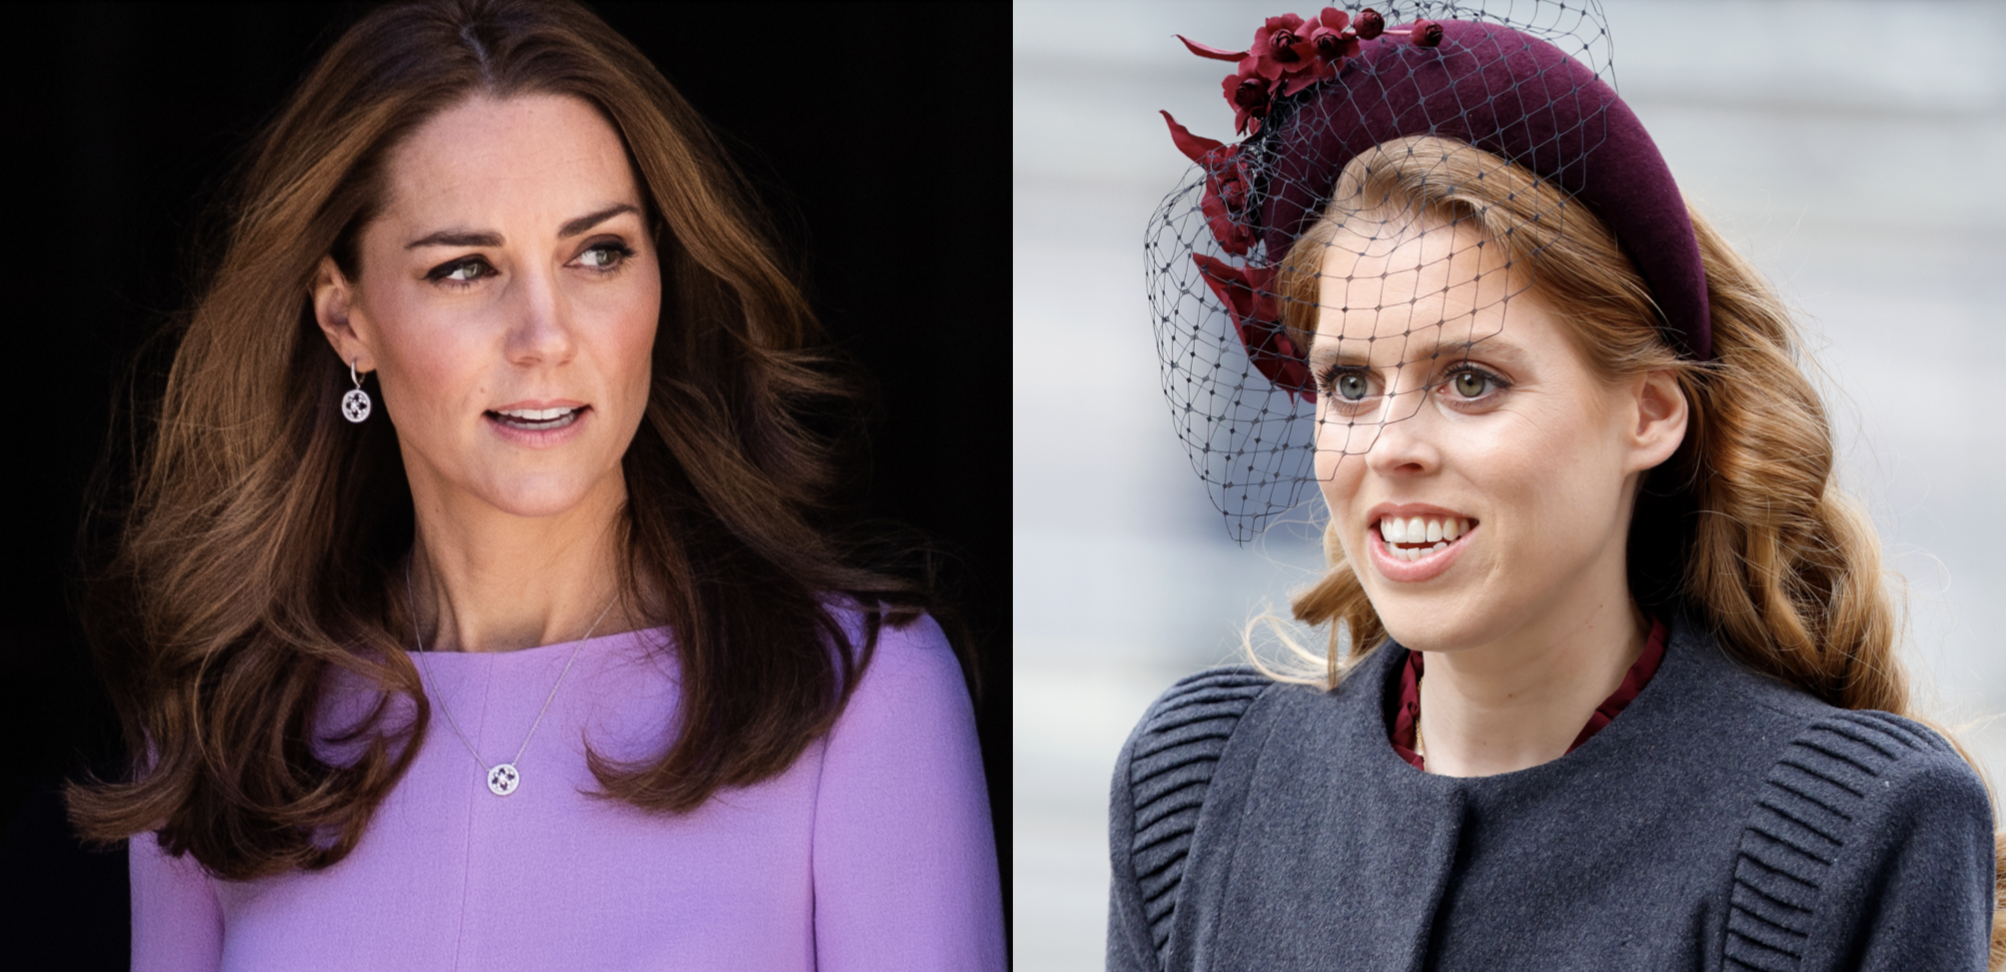 Royal Style Watch: From Kate Middleton's rule-breaking look to Princess  Beatrice's borrowed dress